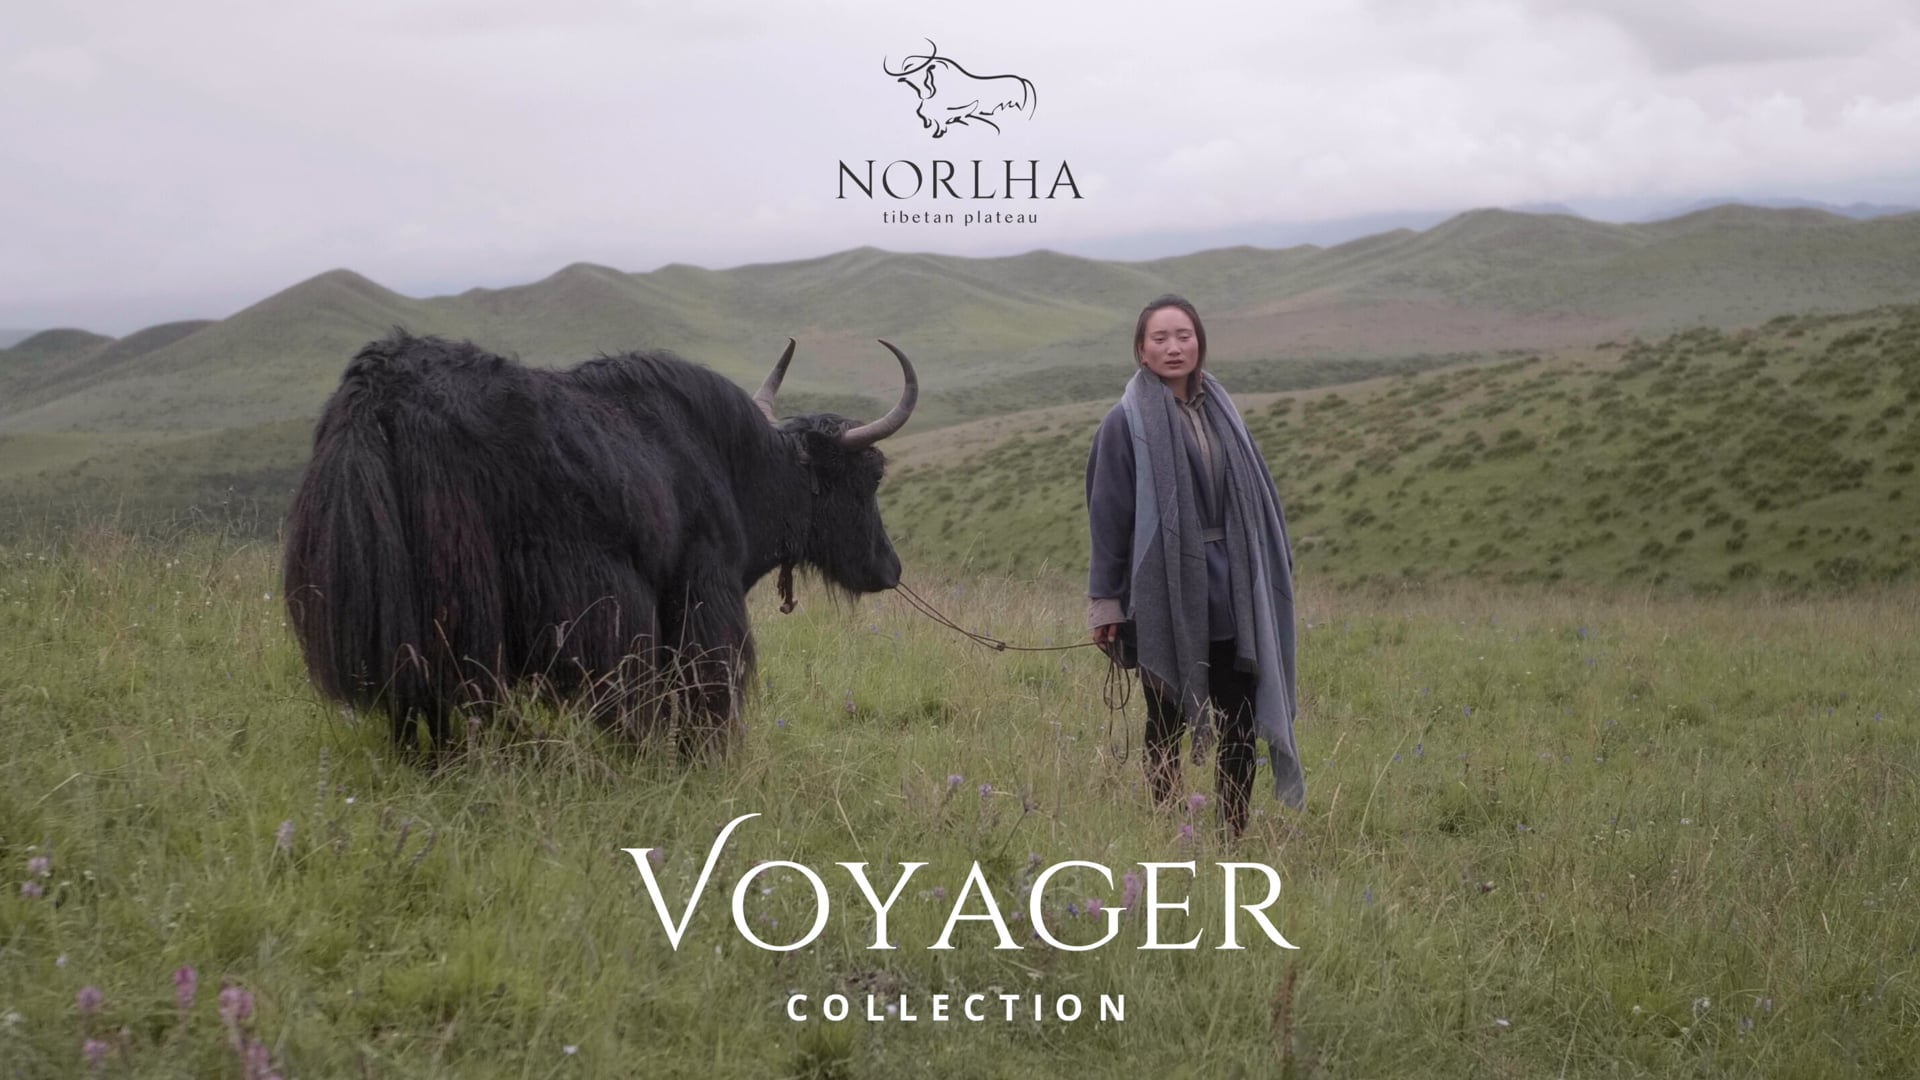 Norlha: Voyager Collection